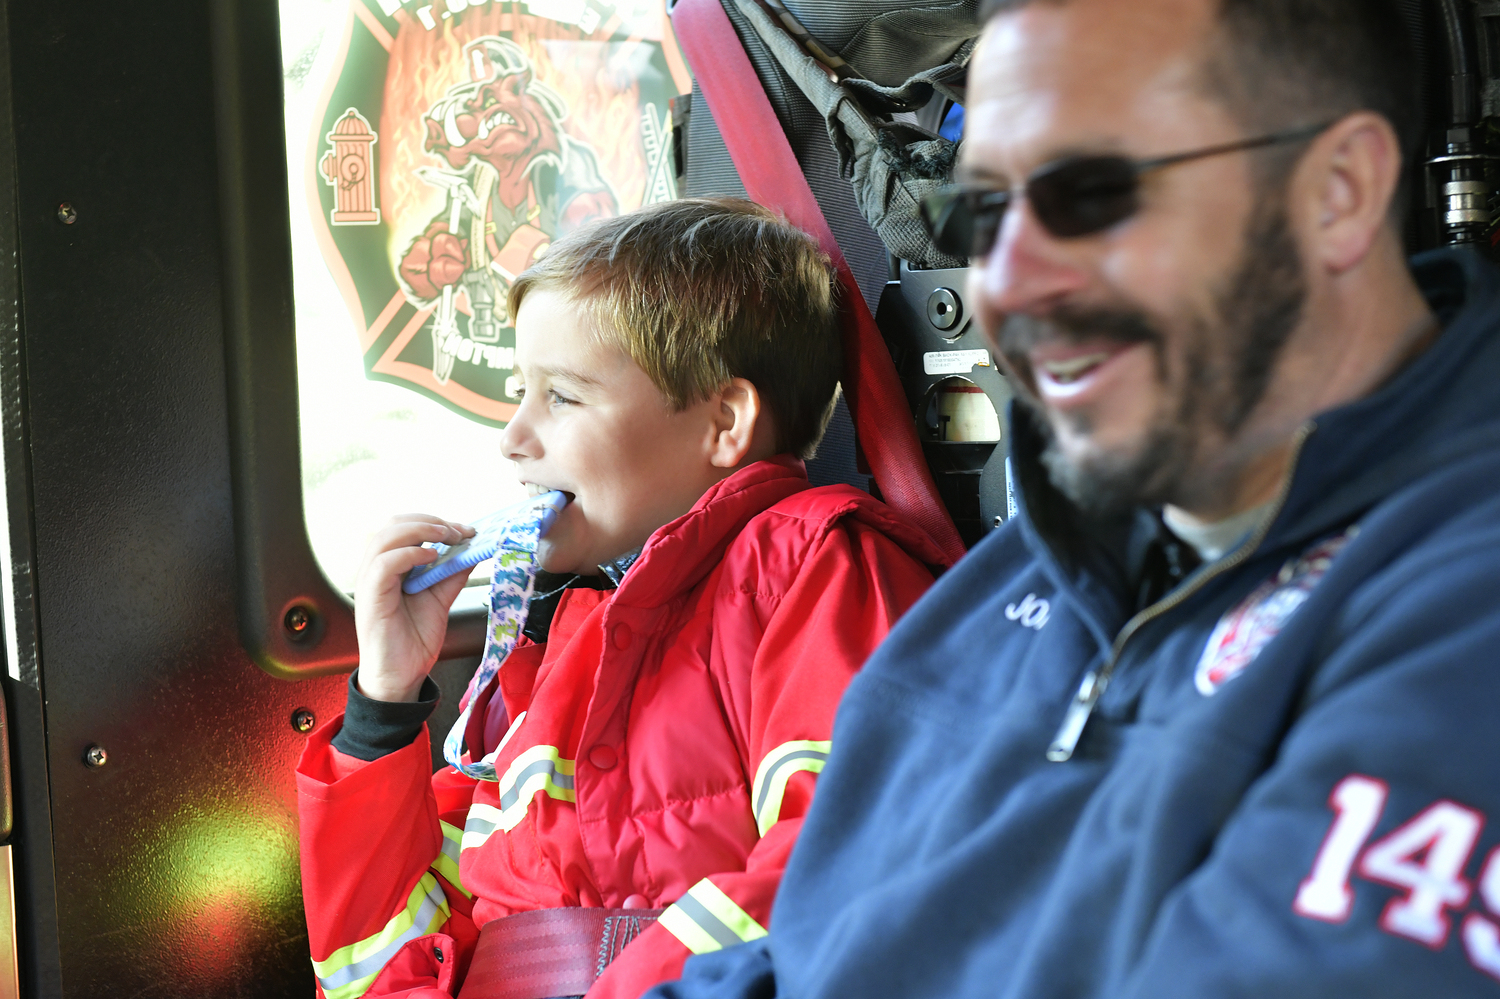 Rowland Egerton-Warburton, with Southampton Agawam Engine firefighter John Parry, getting a ride a fire truck for his birthday on November 15.         DANA SHAW